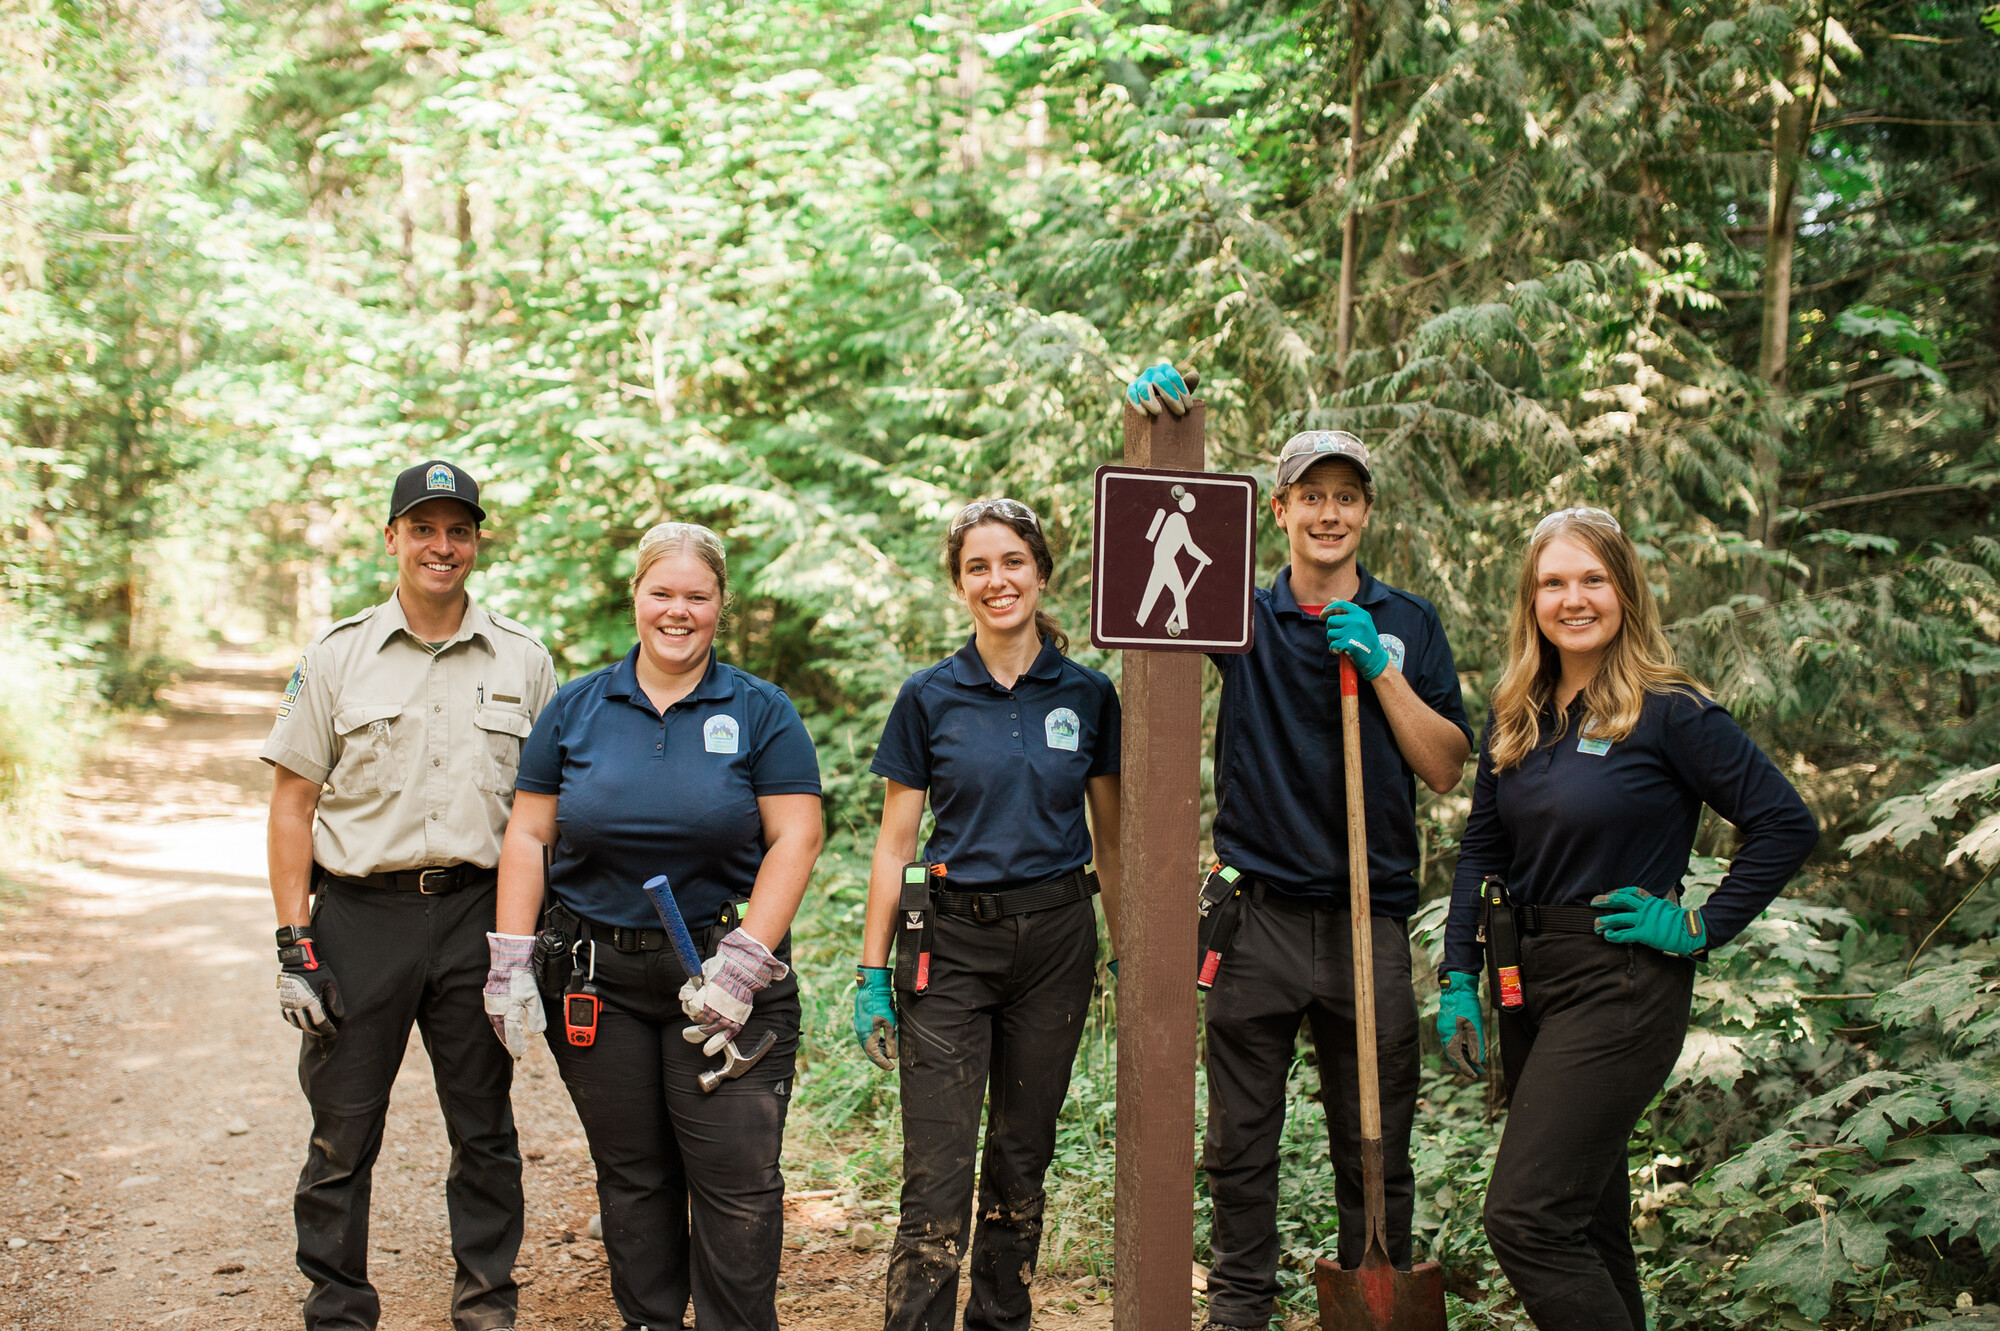 Rangers posing beside a newly installed trail sign in Chemainus Park.